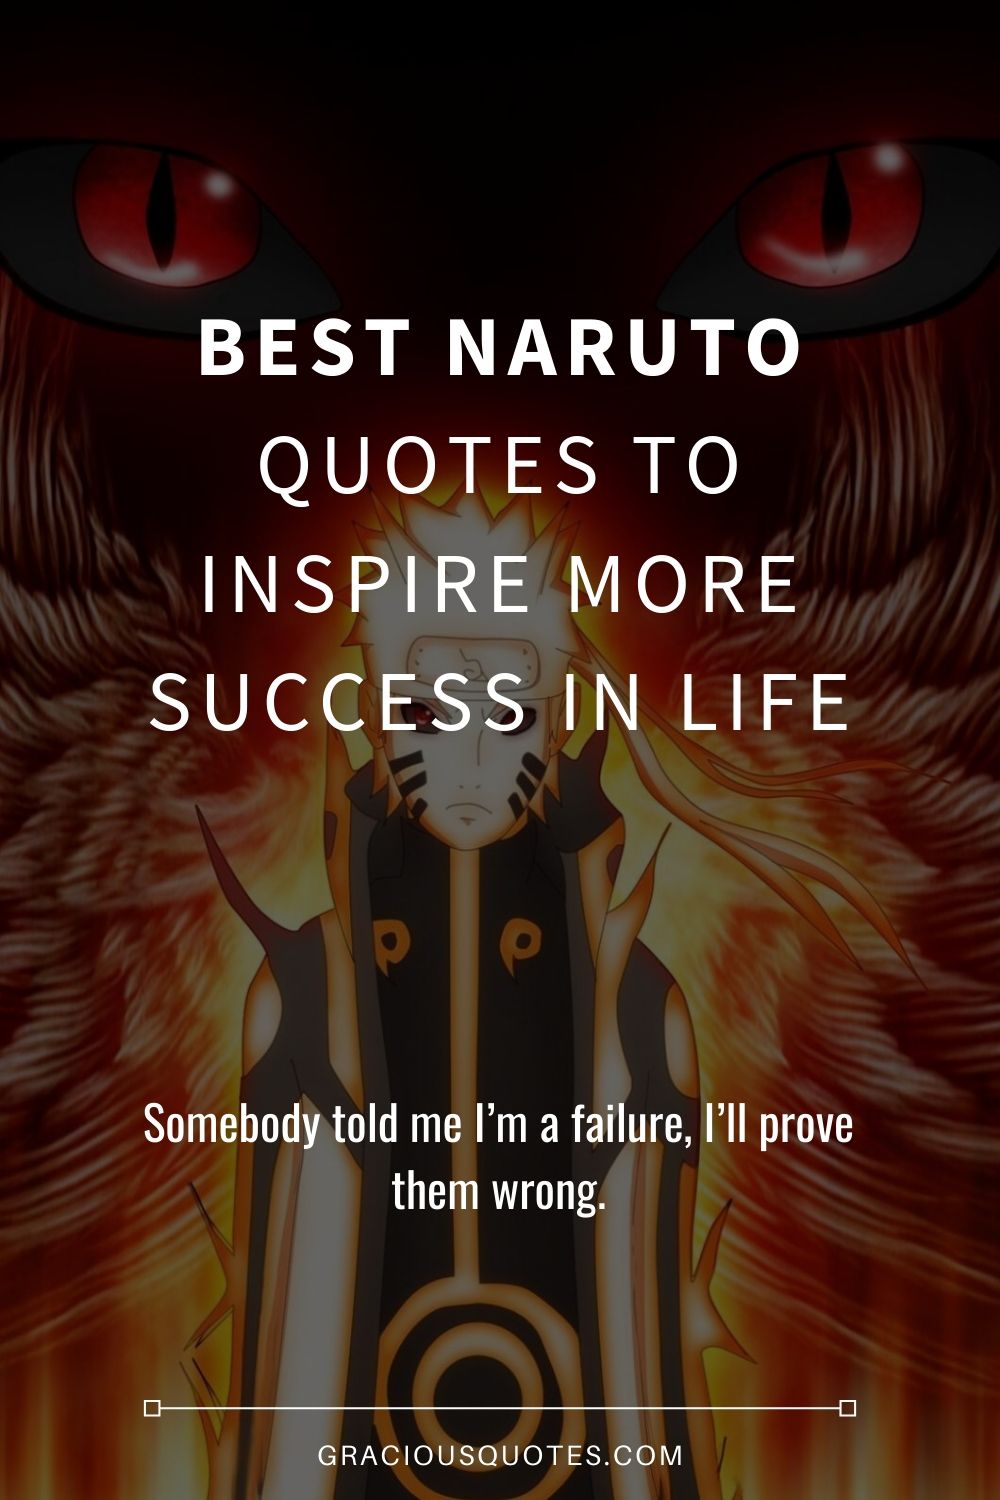 Best-Naruto-Quotes-to-Inspire-More-Success-in-Life-Gracious-Quotes